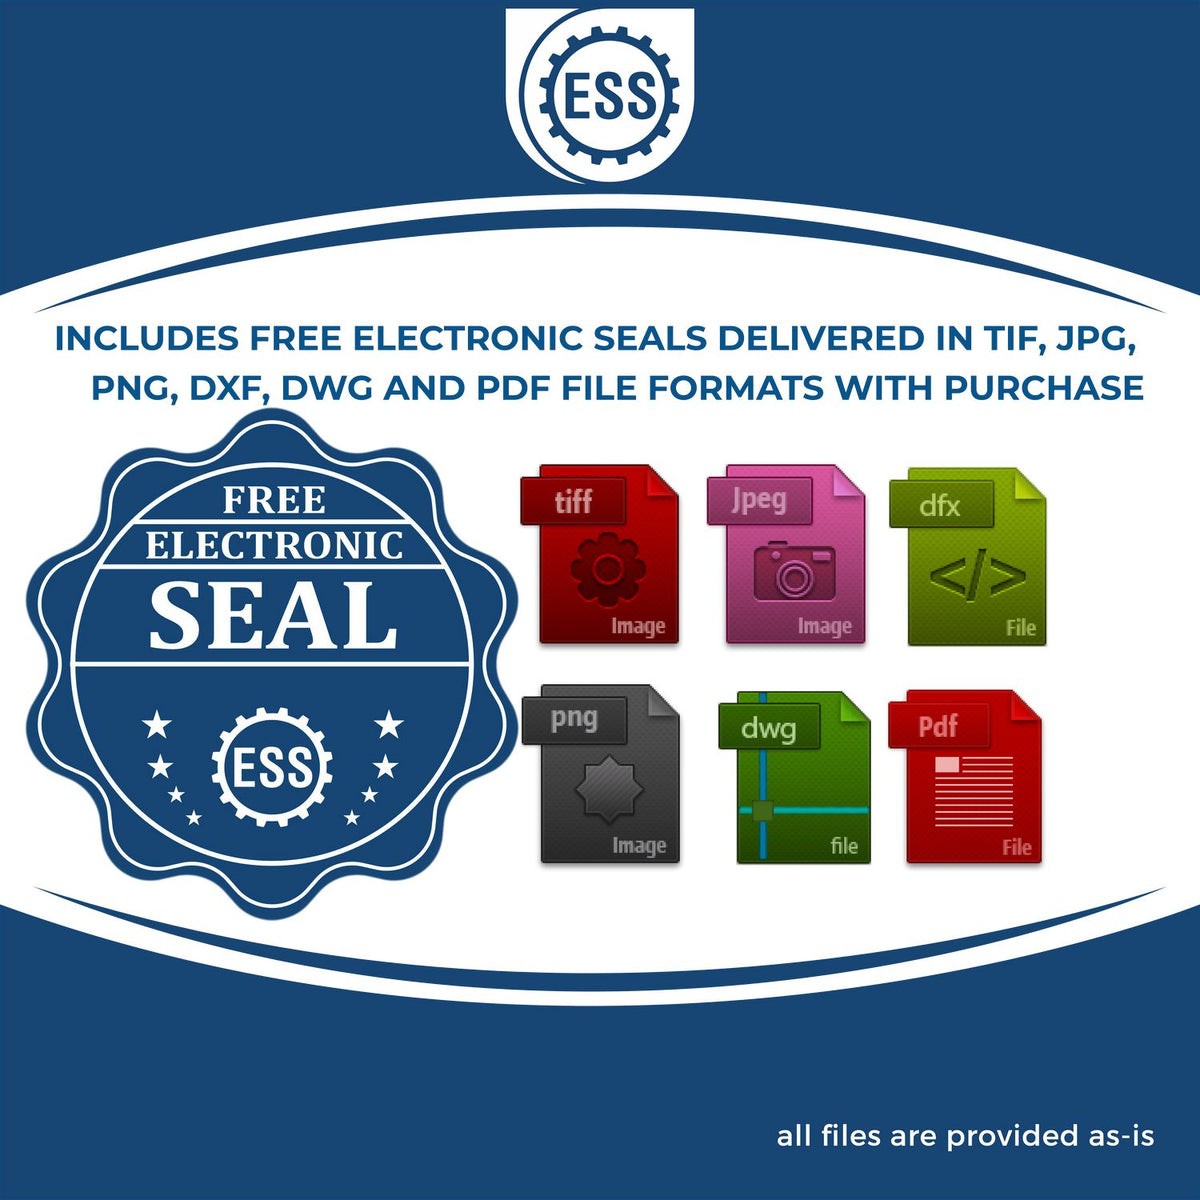 An infographic for the free electronic seal for the Handheld Texas Professional Geologist Embosser illustrating the different file type icons such as DXF, DWG, TIF, JPG and PNG.